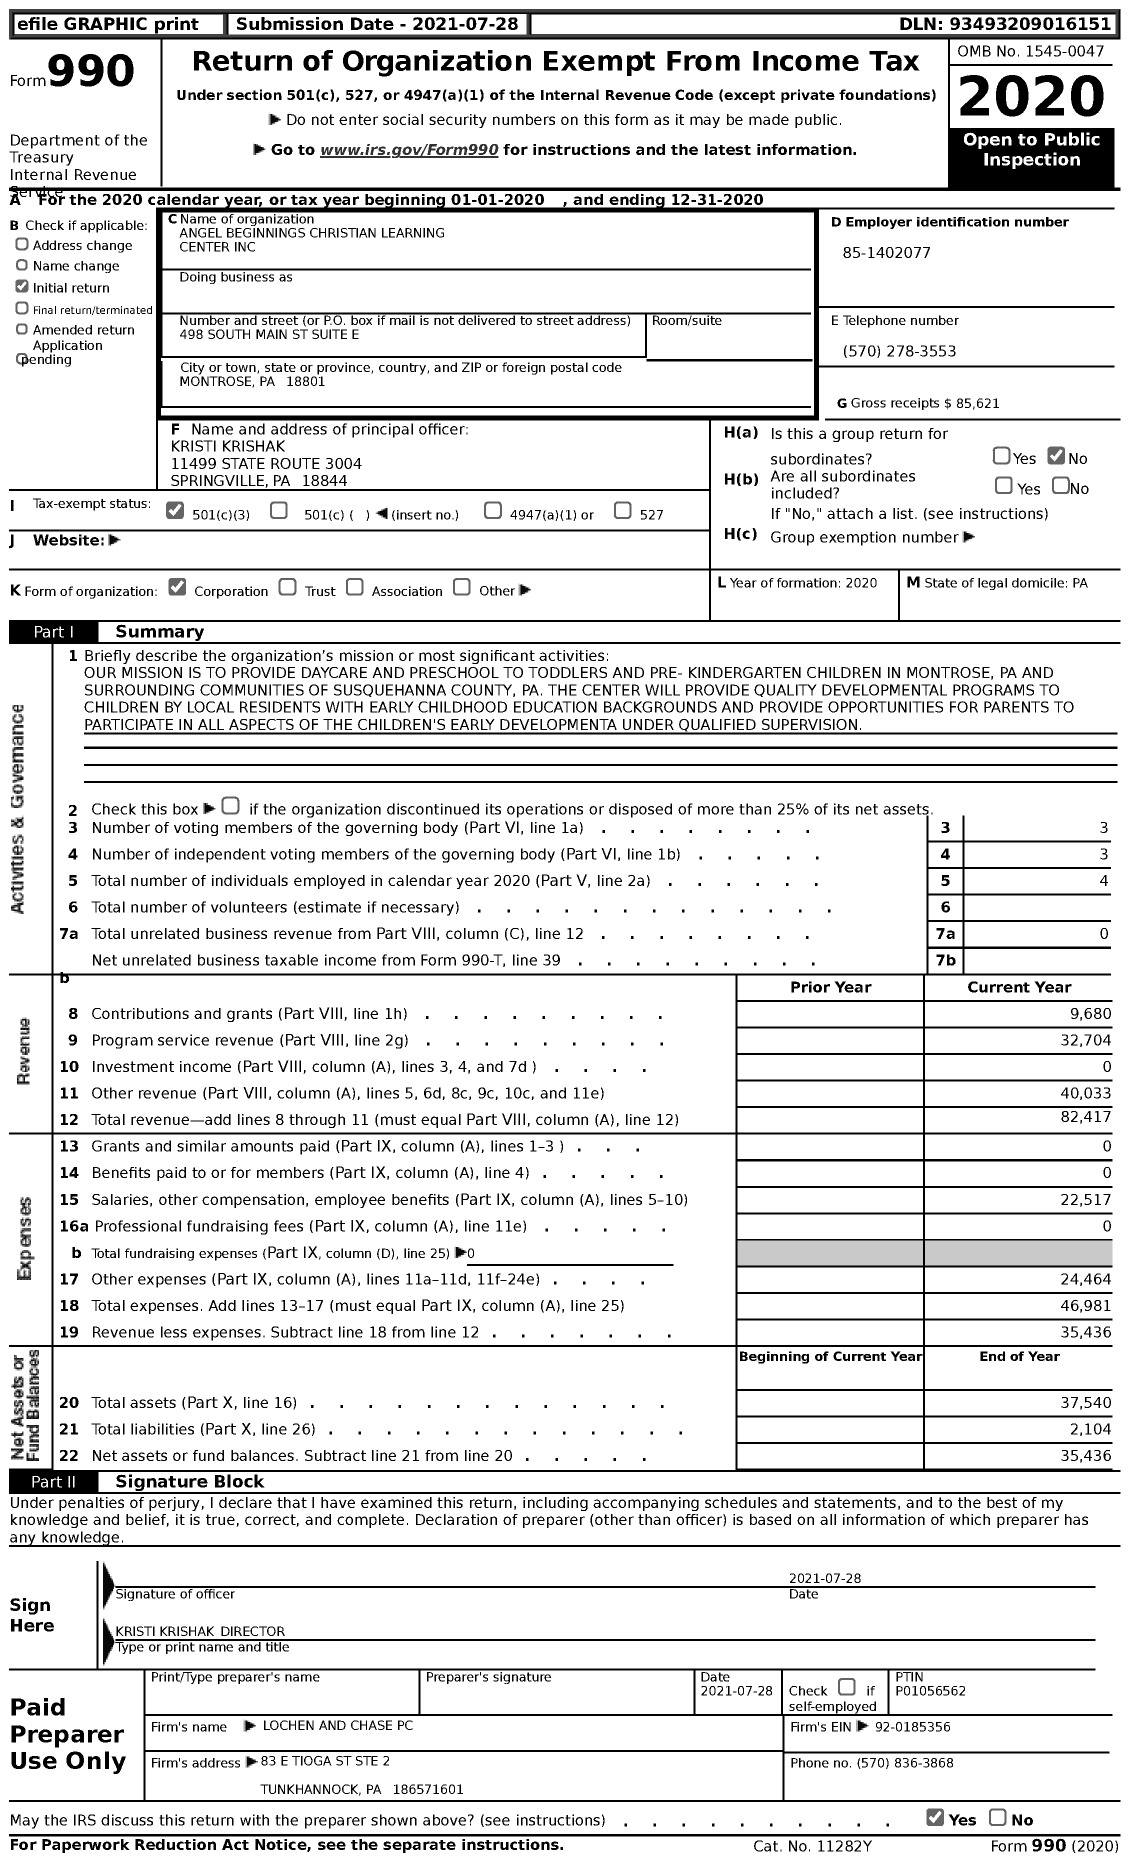 Image of first page of 2020 Form 990 for Angel Beginnings Christian Learning Center